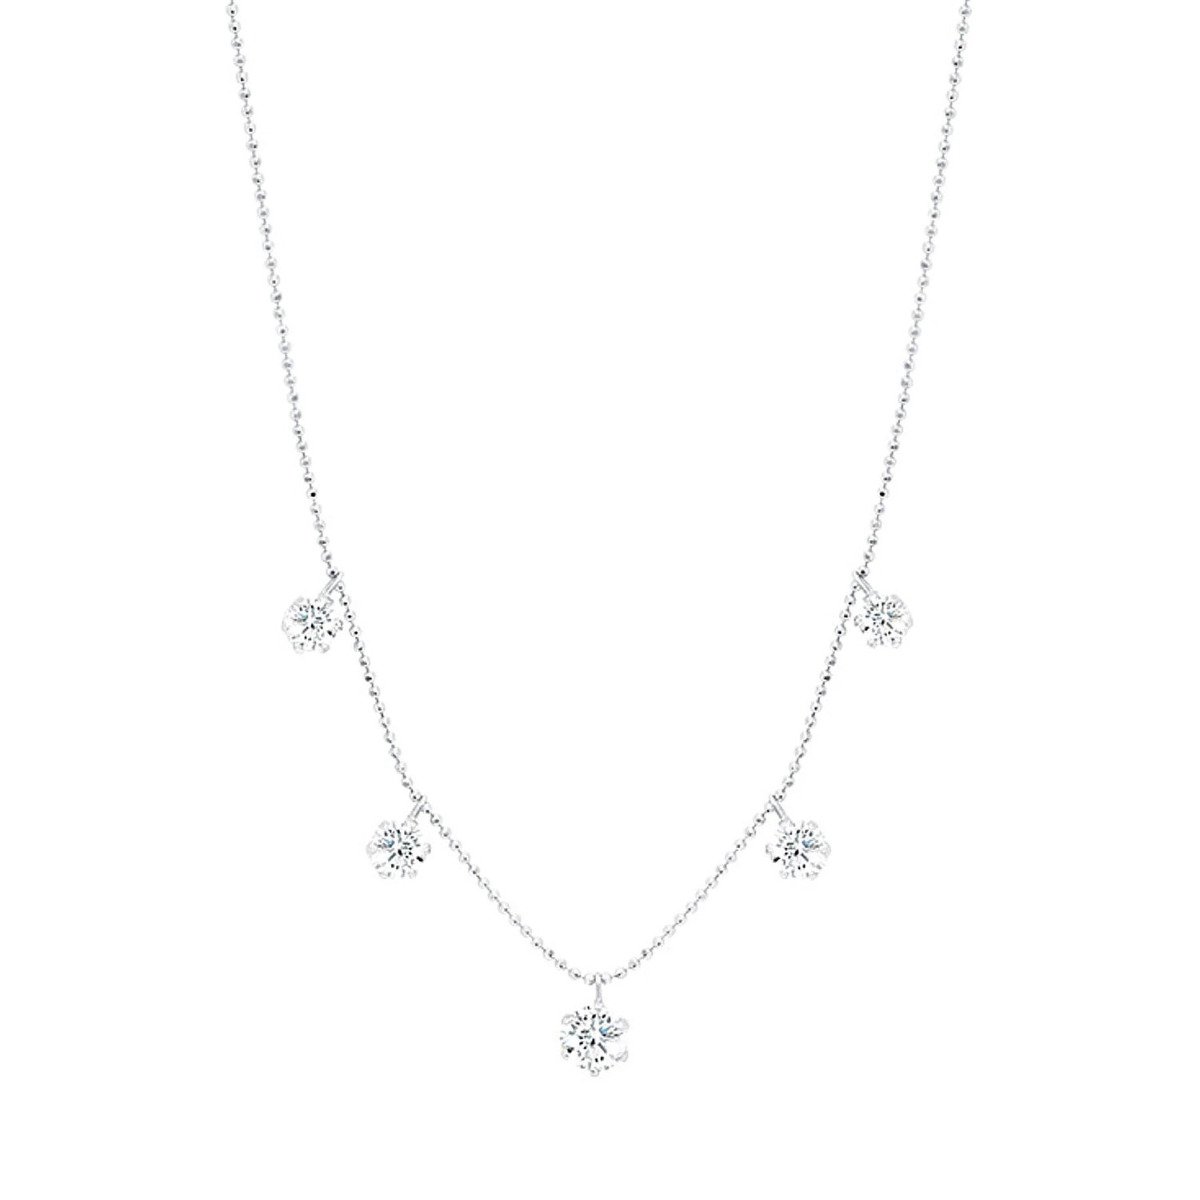 Graziela Gems Floating Large Diamond Necklace in 18kt White Gold